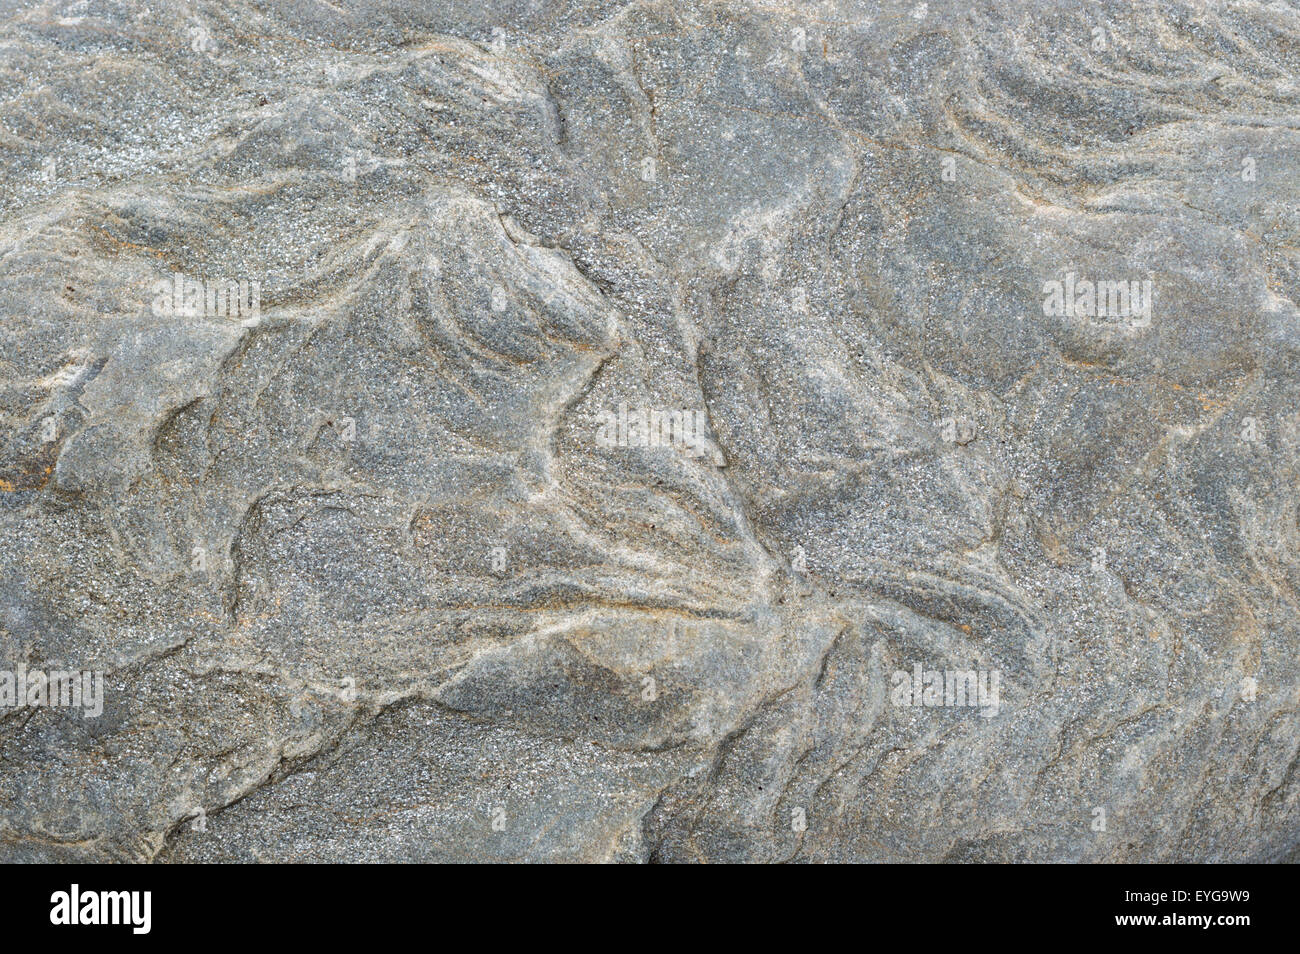 Full frame image of the natural patterns of the rock/stone Stock Photo